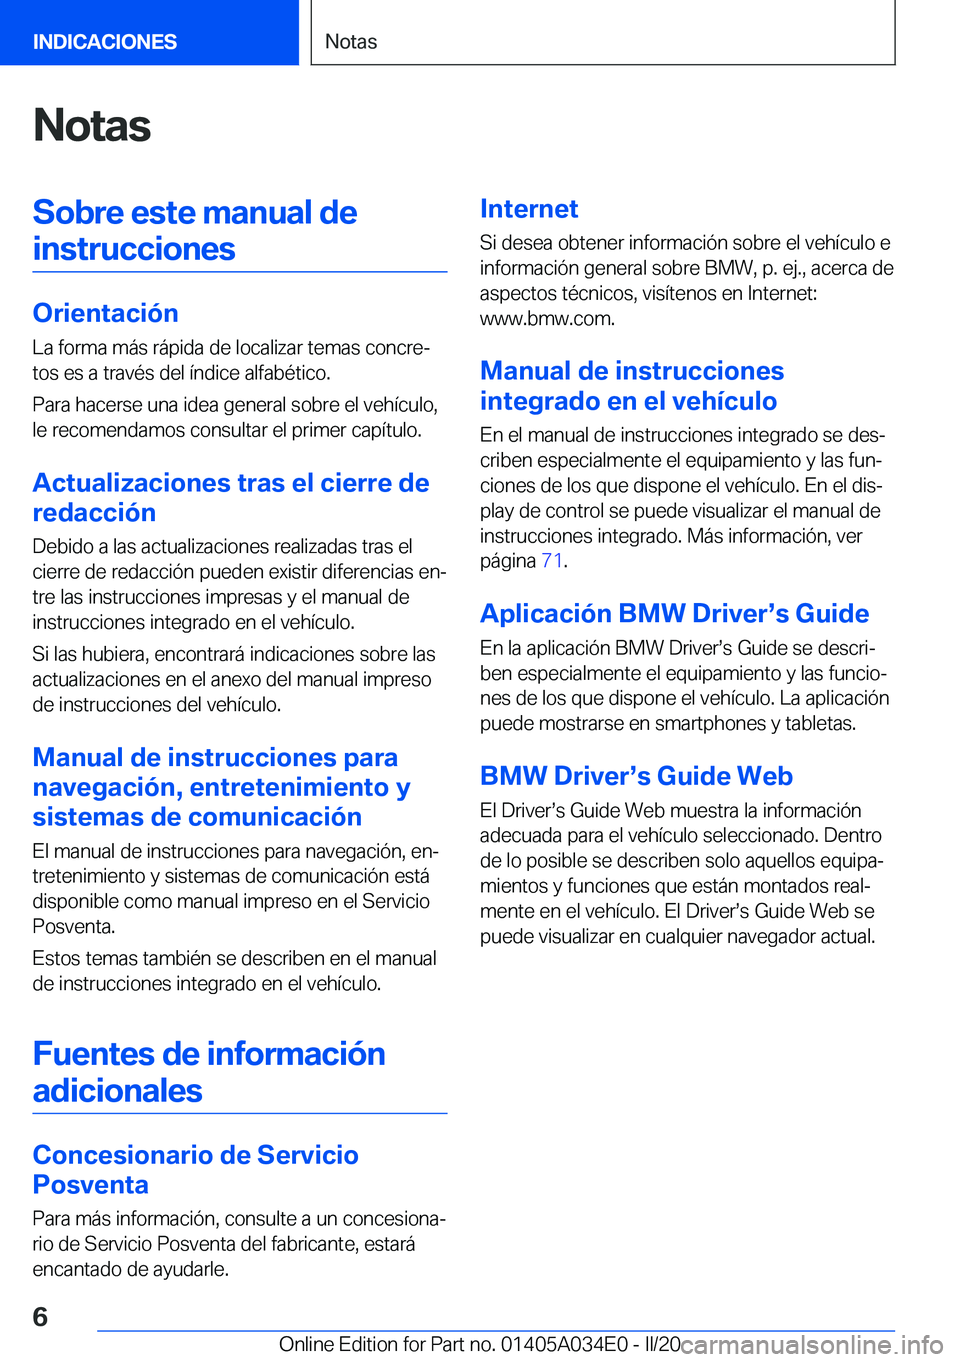 BMW X3 2020  Manuales de Empleo (in Spanish) �N�o�t�a�s�S�o�b�r�e��e�s�t�e��m�a�n�u�a�l��d�e�i�n�s�t�r�u�c�c�i�o�n�e�s
�O�r�i�e�n�t�a�c�i�